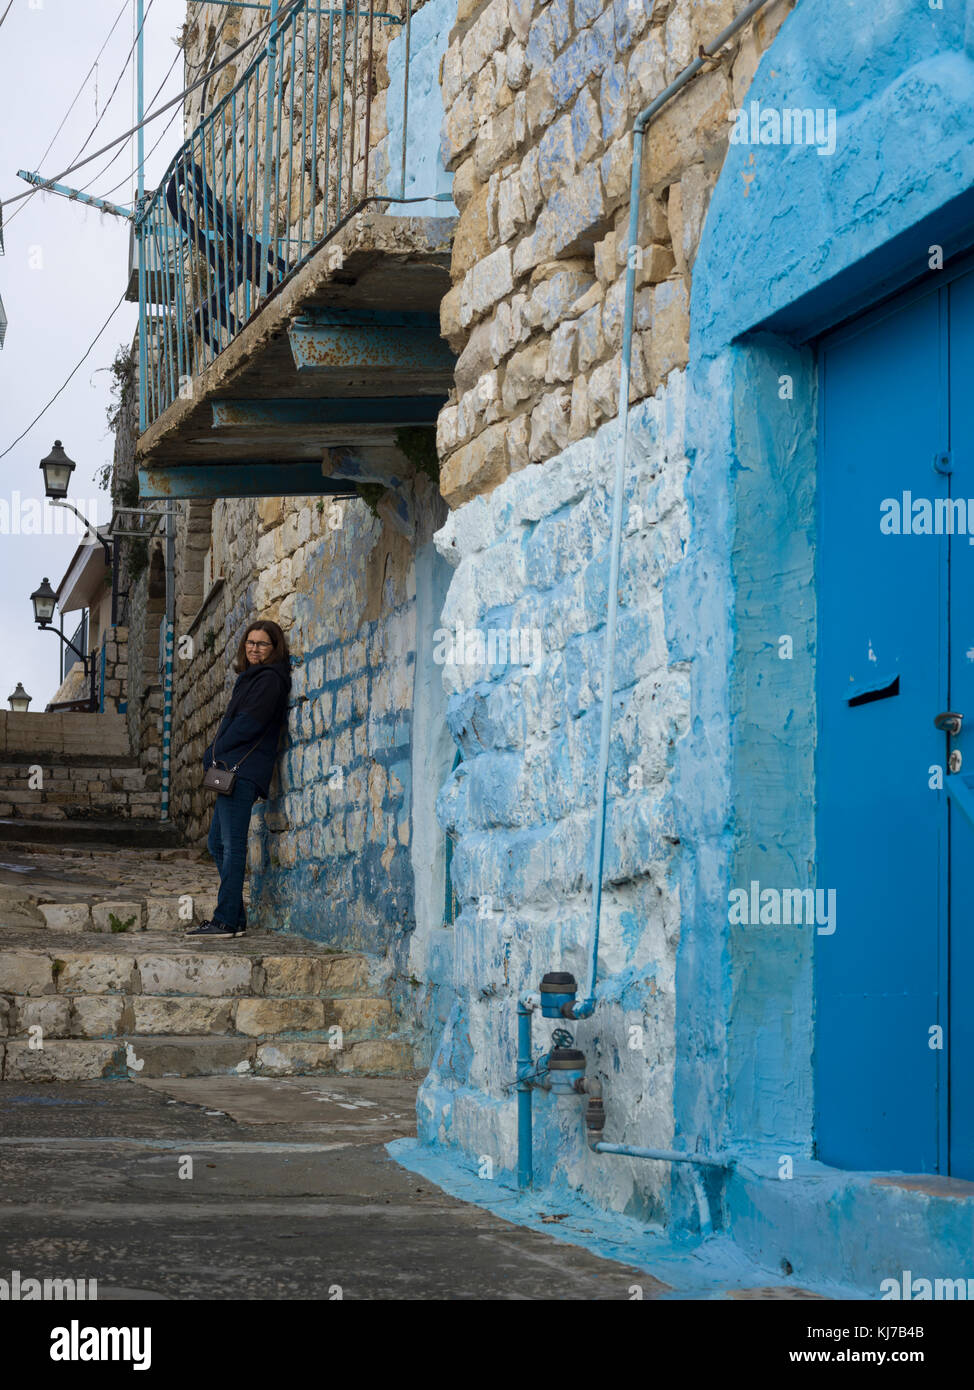 Woman leaning on stone wall in street, Safed, Northern District, Israel Stock Photo